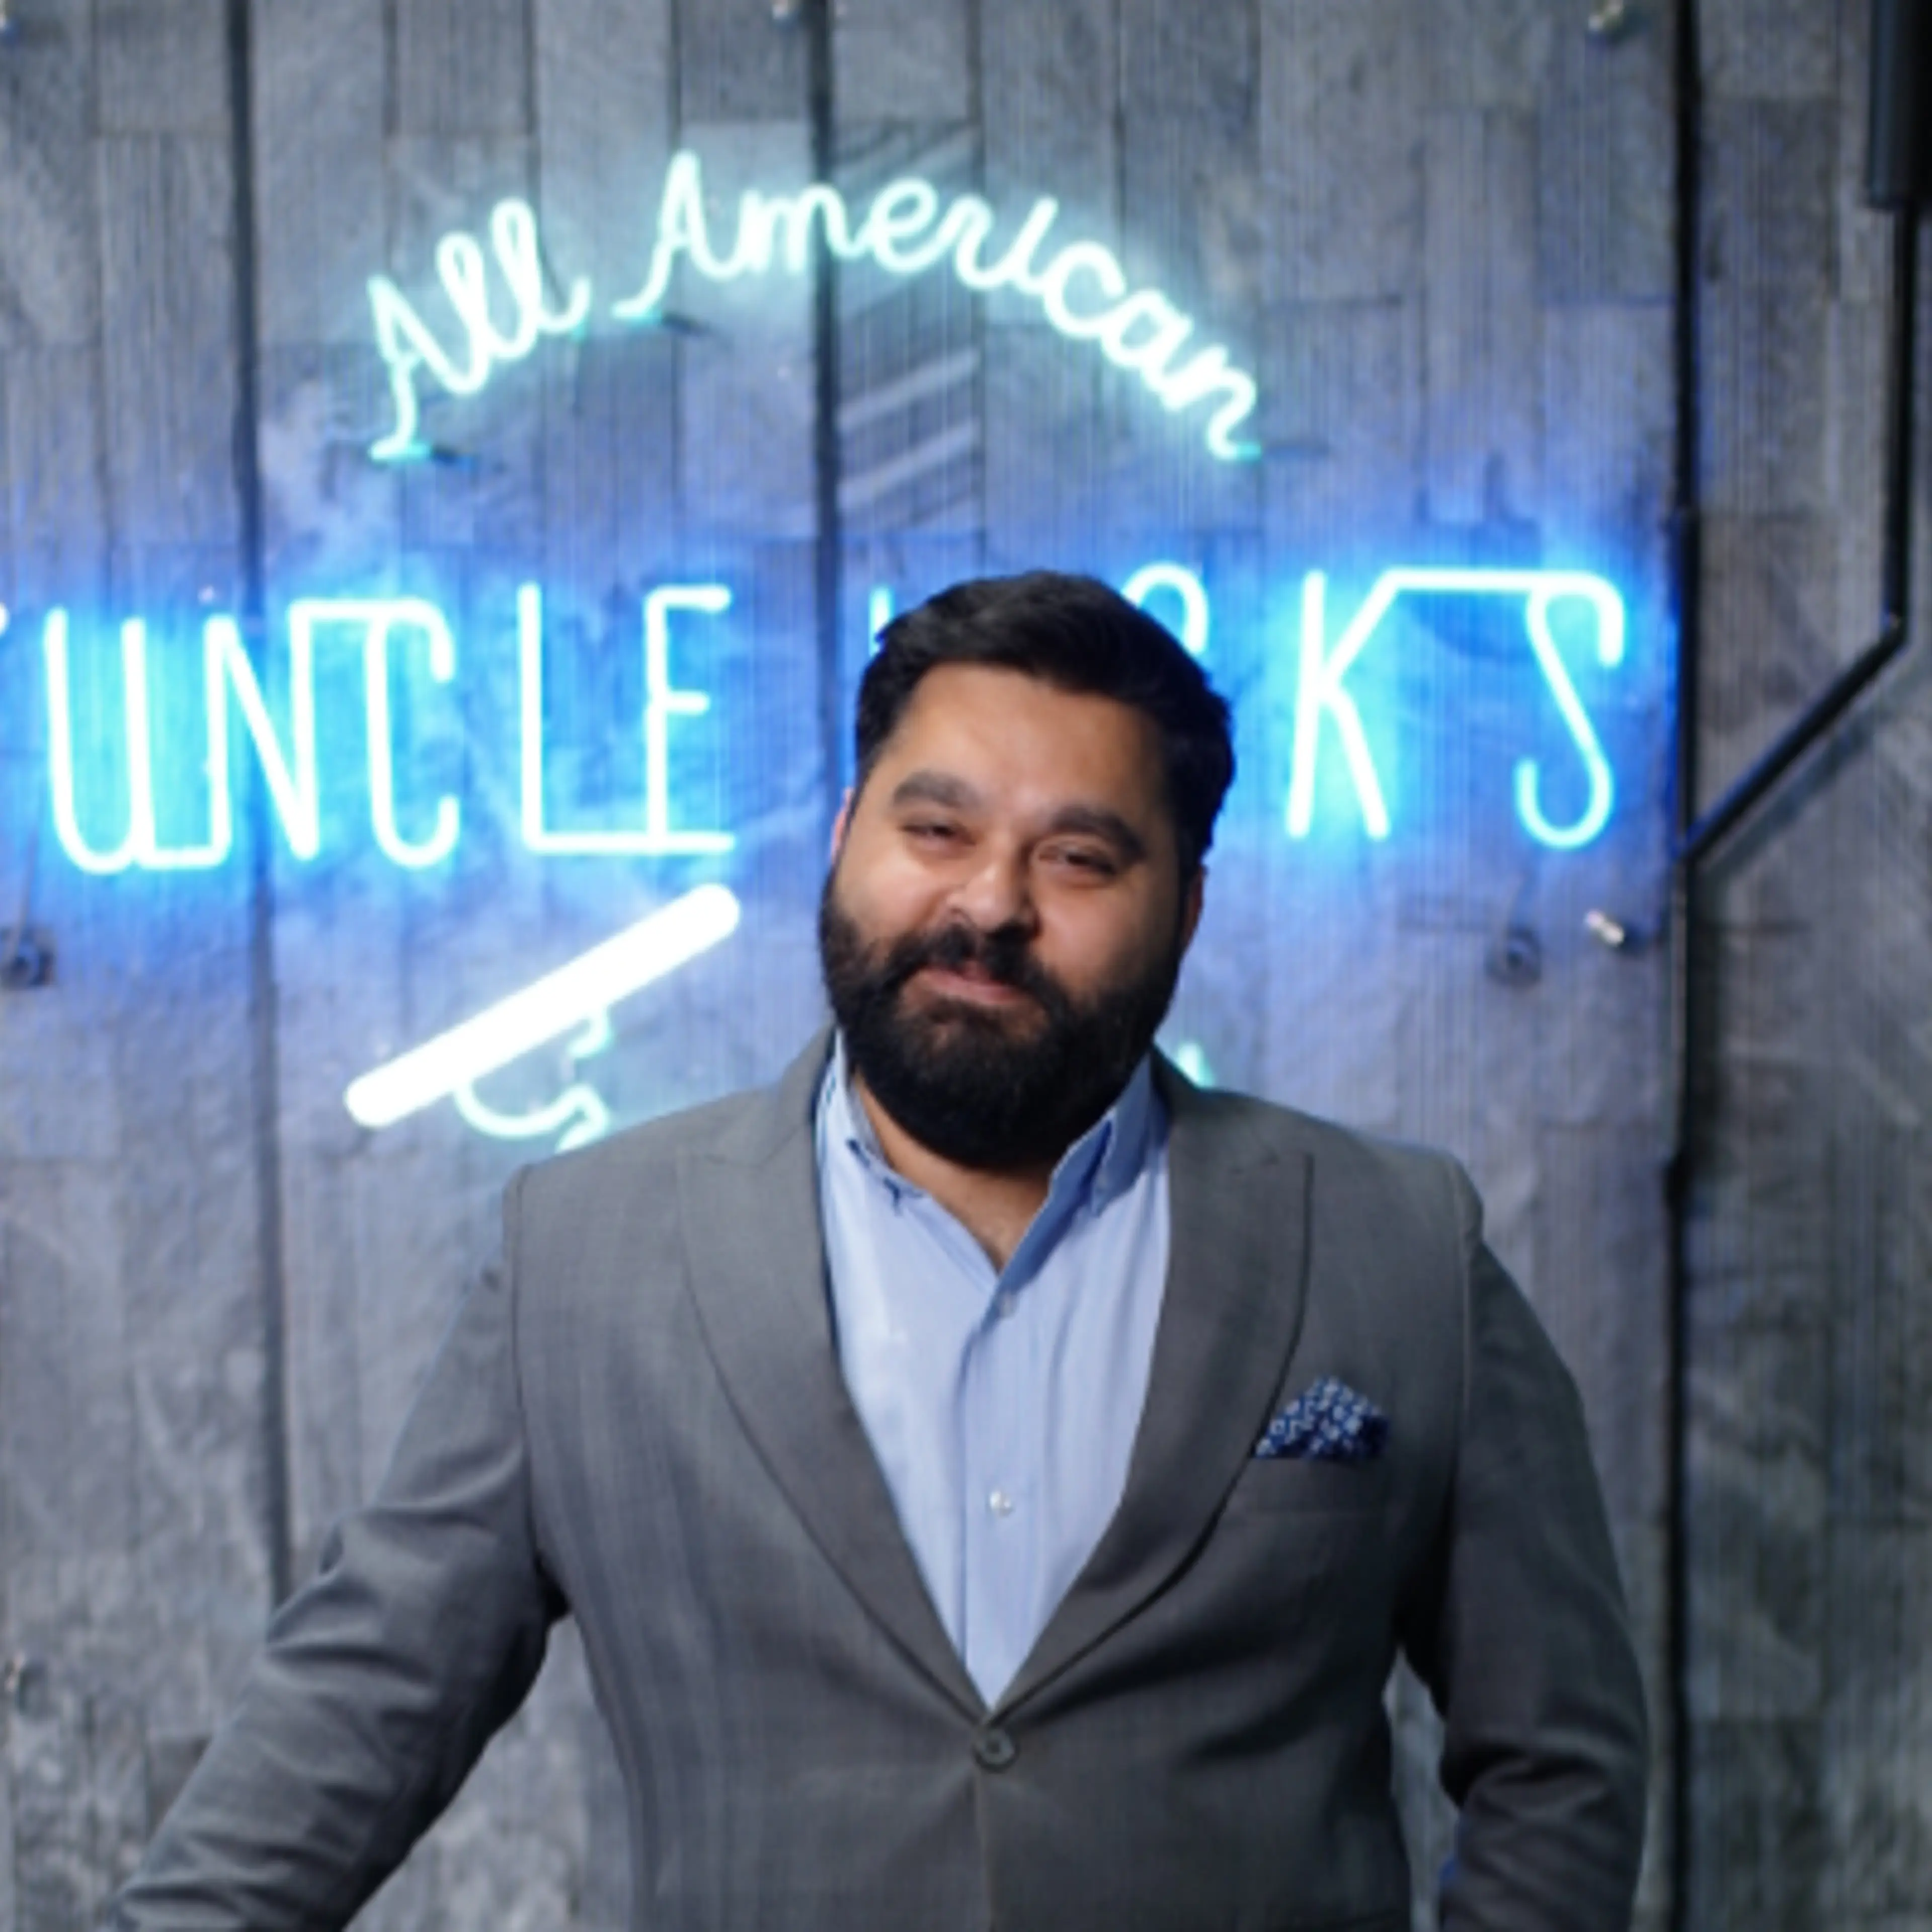 From Rs 3 Cr to clocking Rs 16.5 Cr turnover in 4 years: the story of Chandigarh-based QSR brand Uncle Jack's